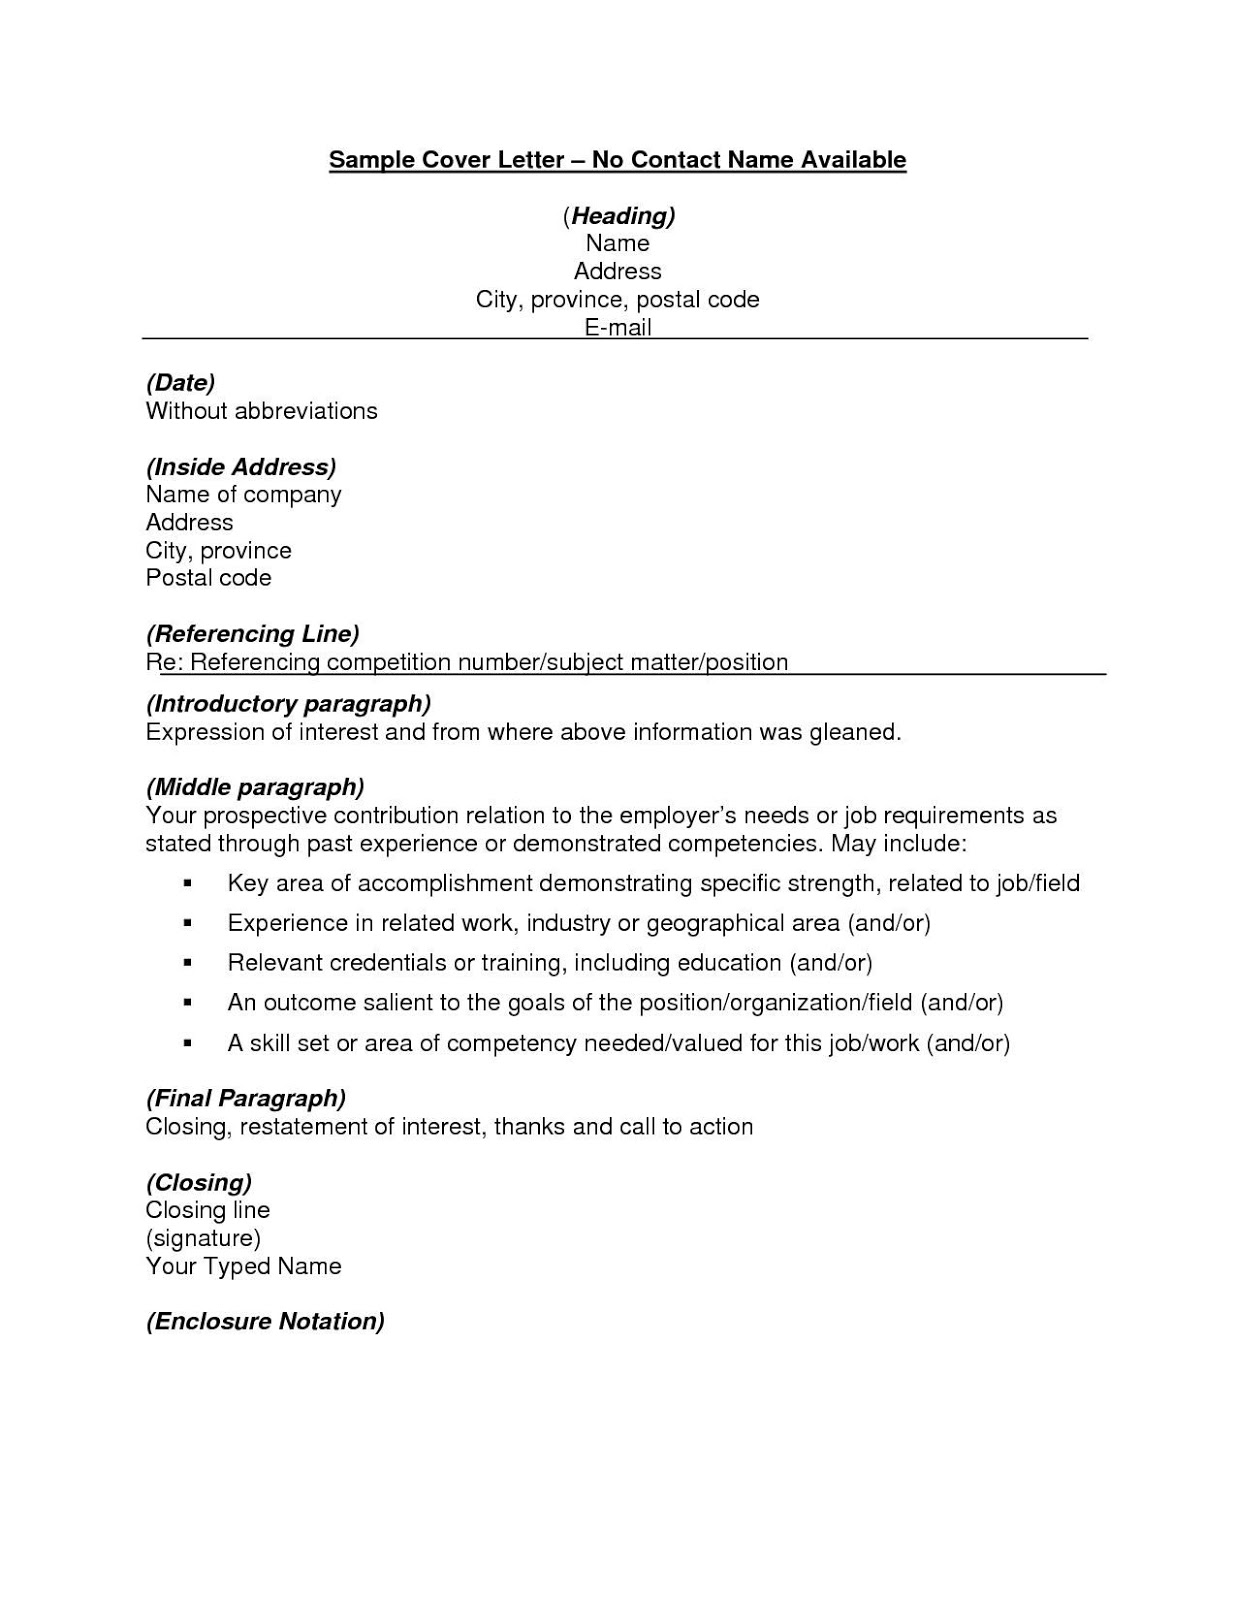 sample cover letter without company address